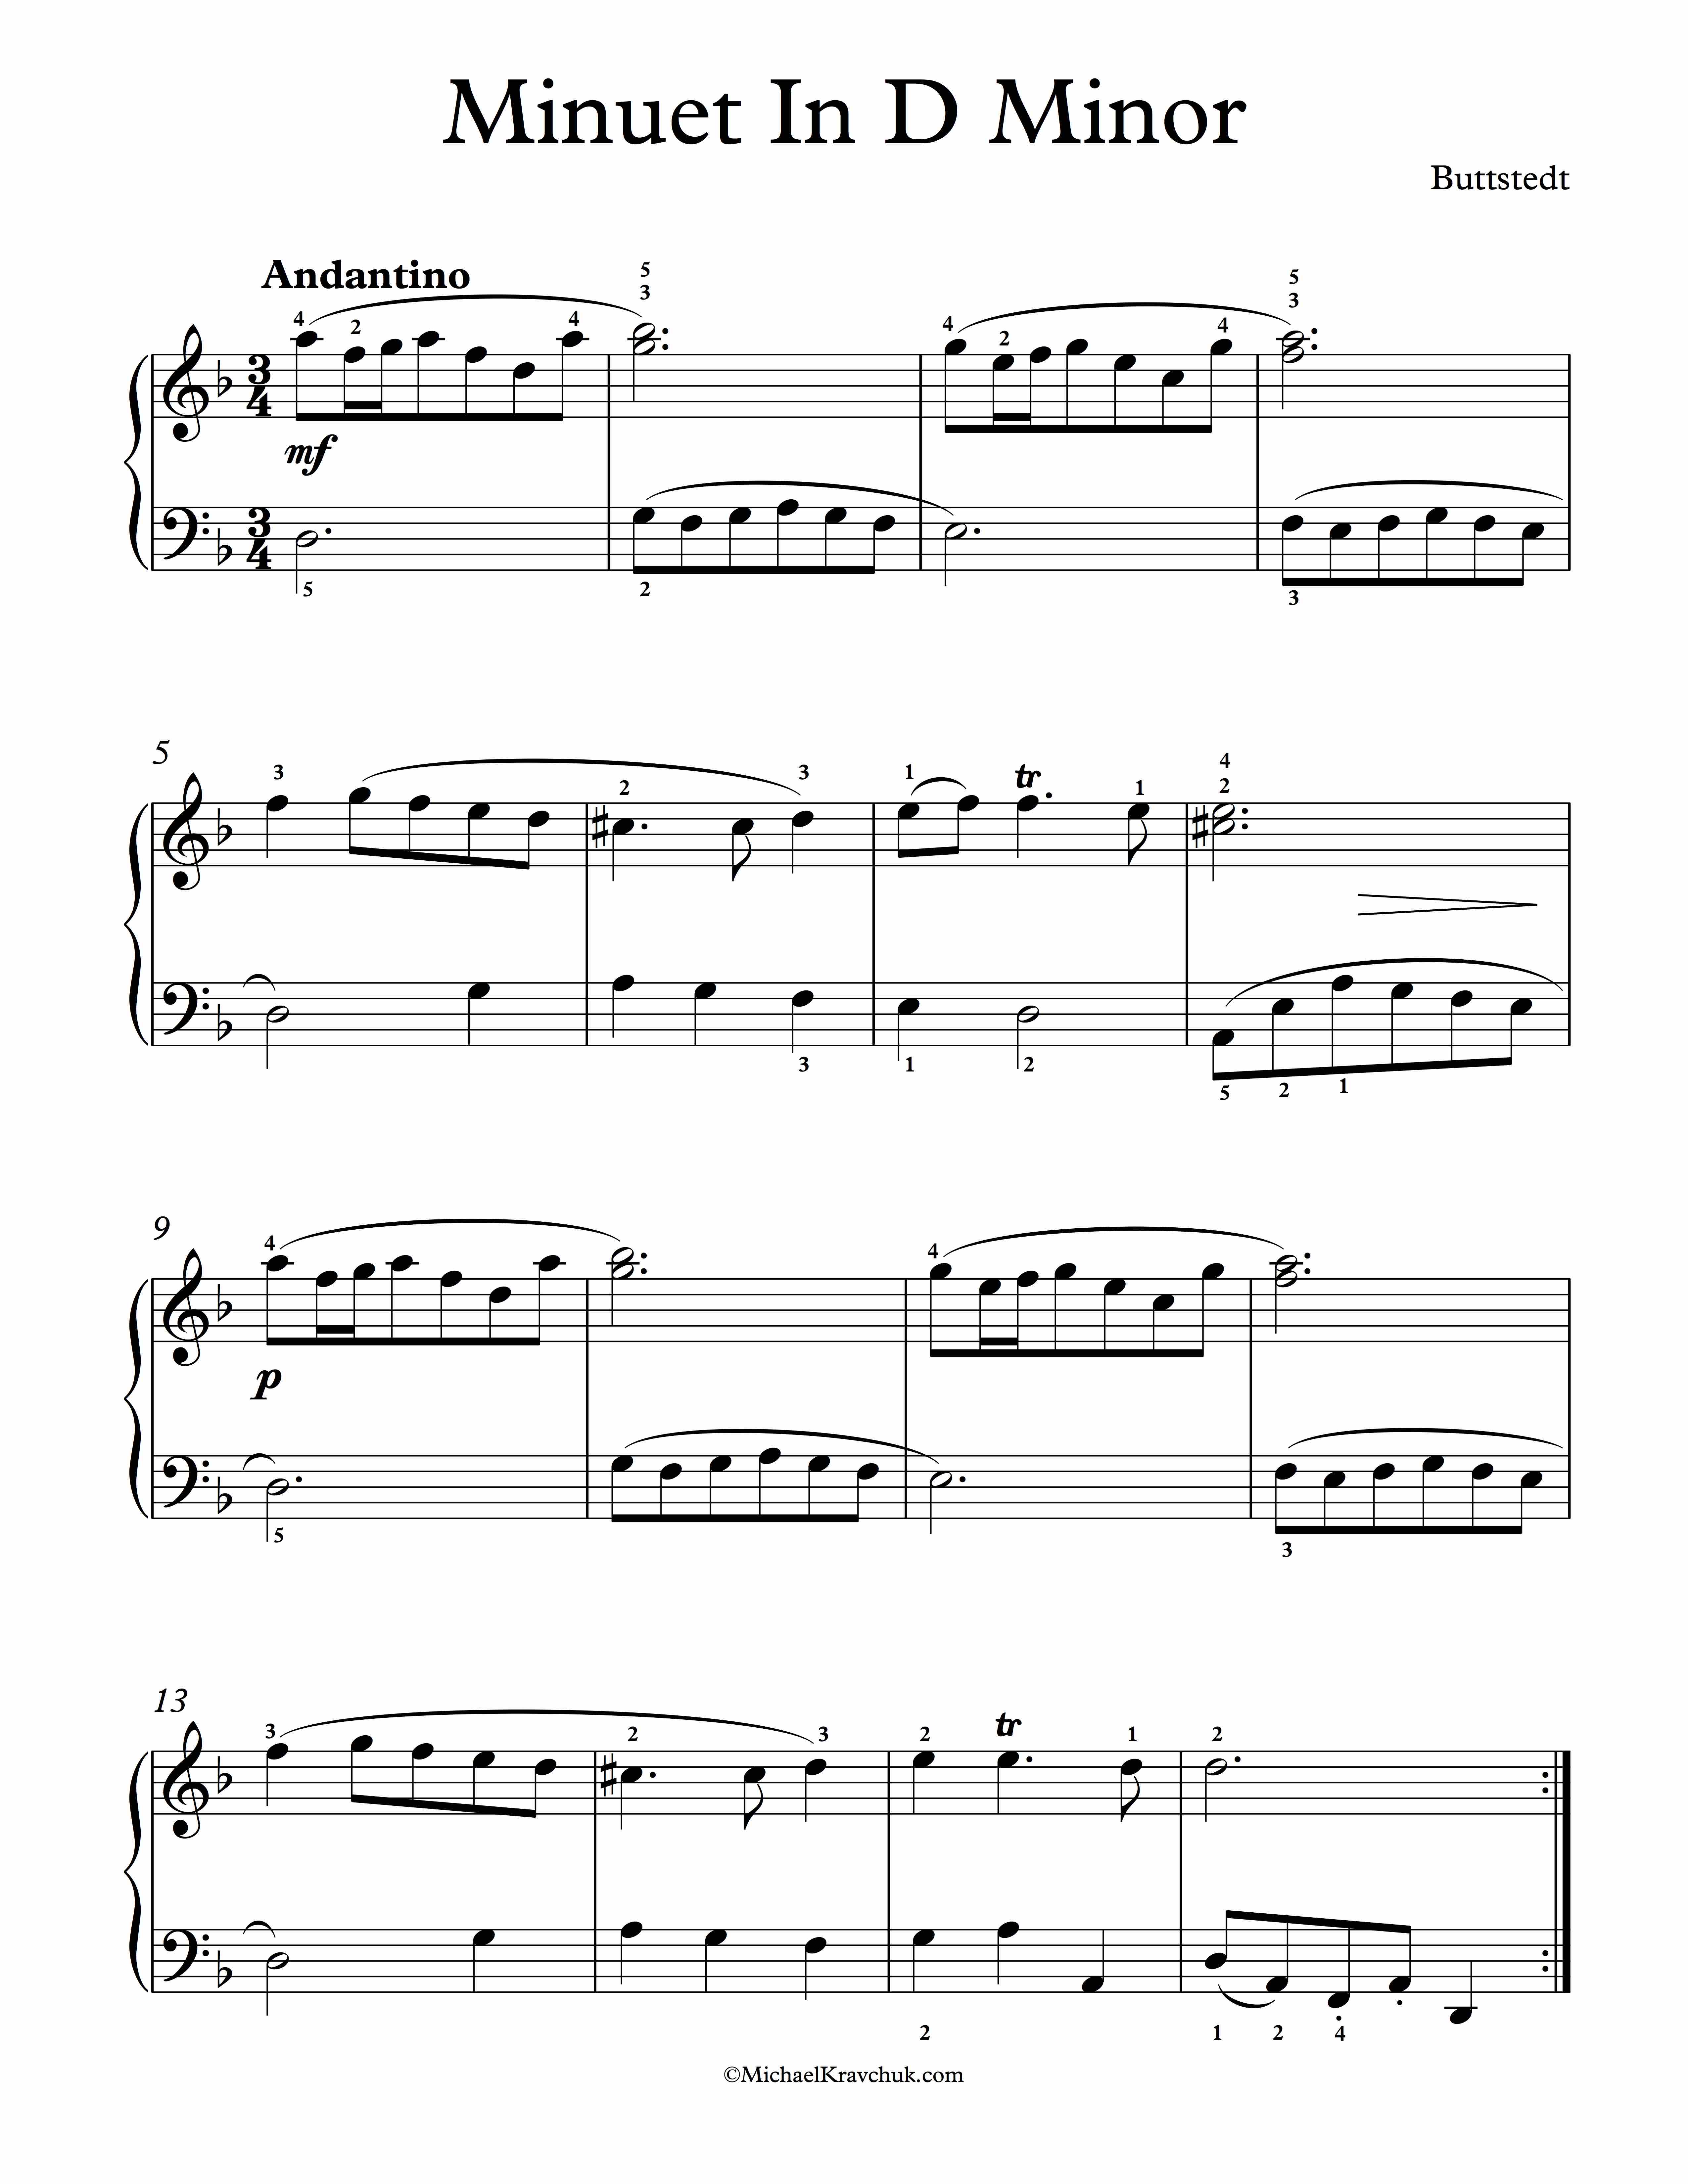 Free Piano Sheet Music - Minuet In D Minor - Buttstedt